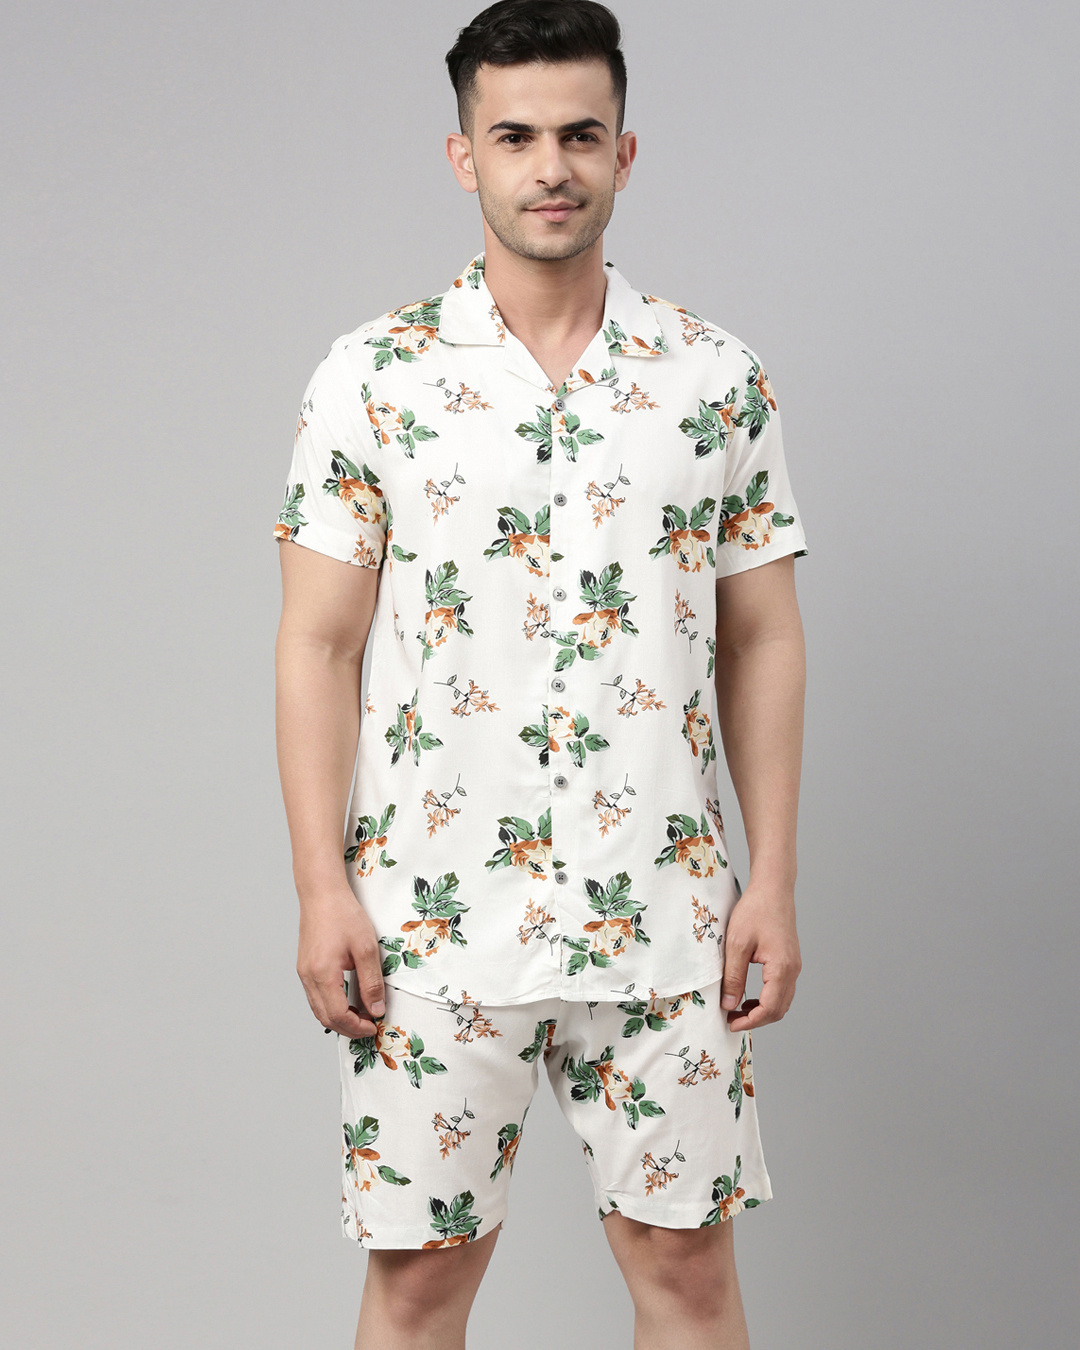 Buy Men's White All Over Floral Printed Nightsuit Online in India at ...